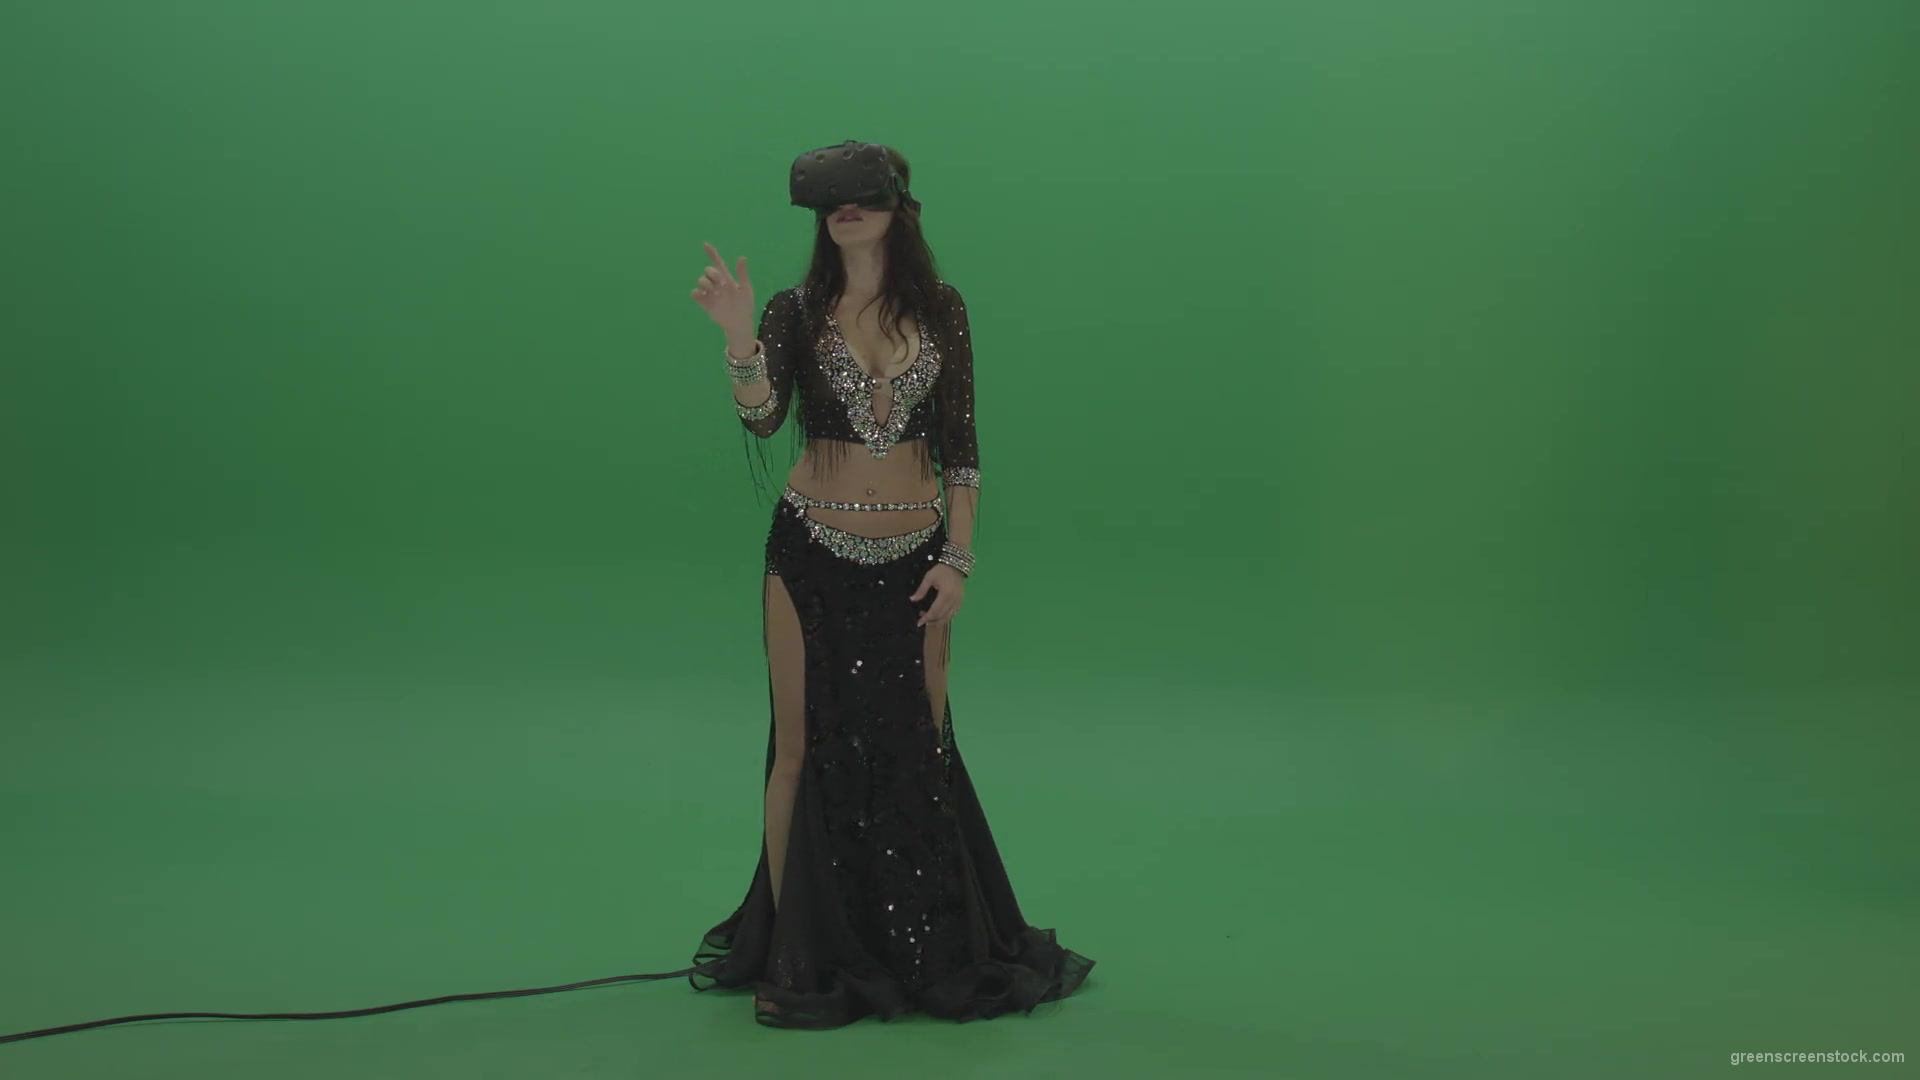 Beautiful-belly-dancer-in-VR-headset-operates-invisible-screen-over-green-screen-background-1920_004 Green Screen Stock